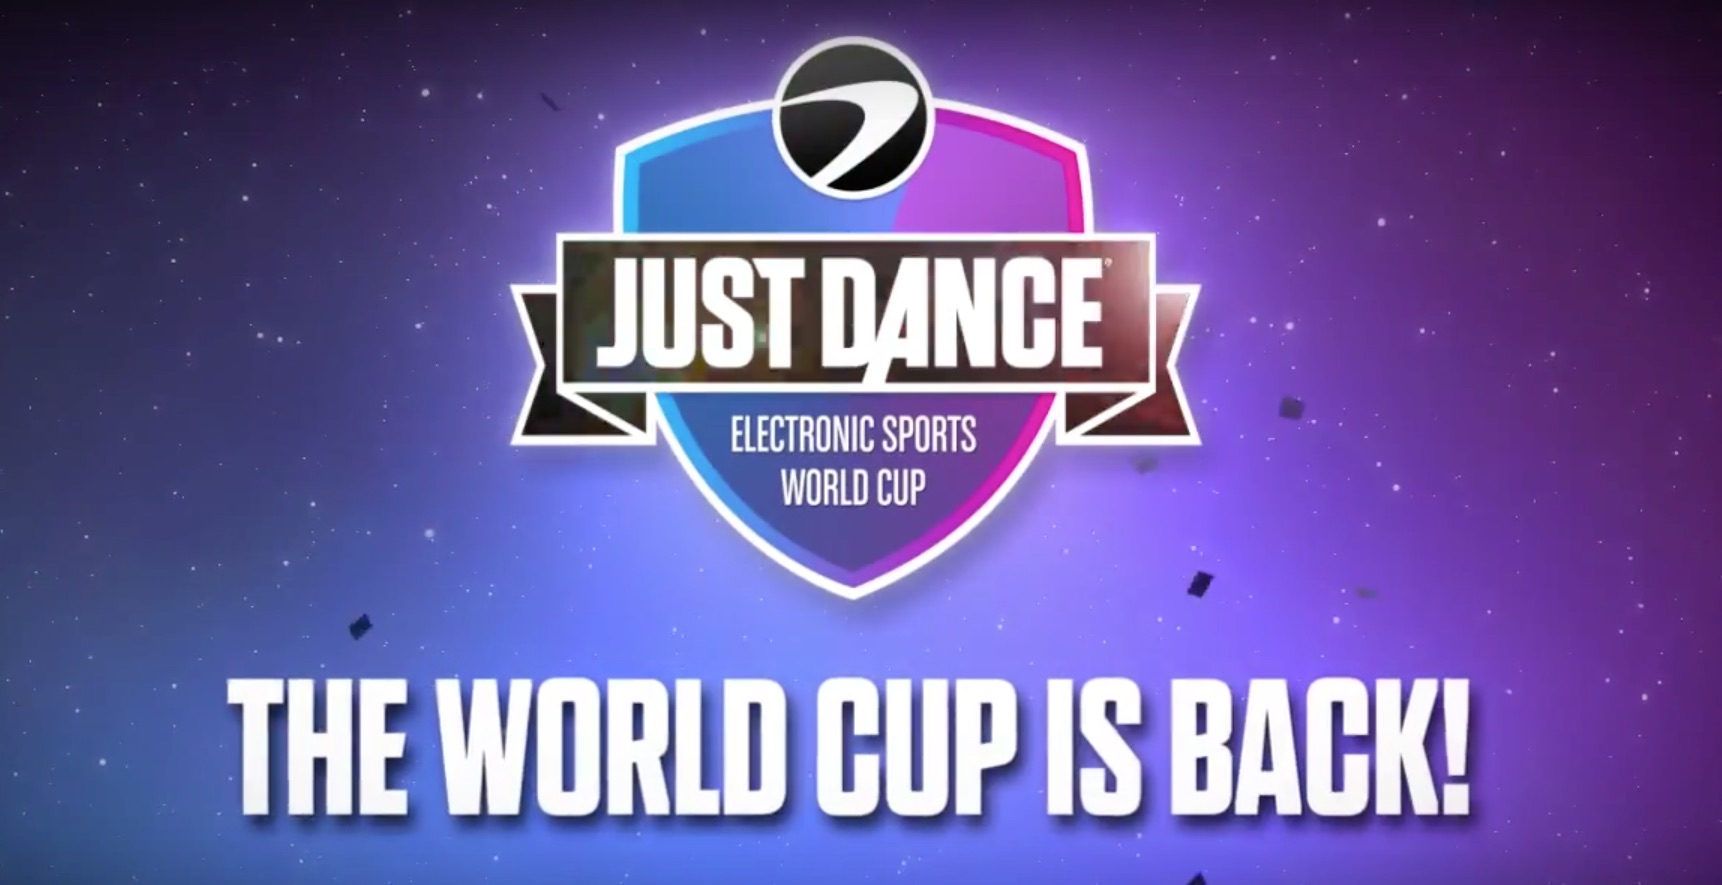 Just Dance Ubisoft Electronic Sports World Cup ESWC 2015